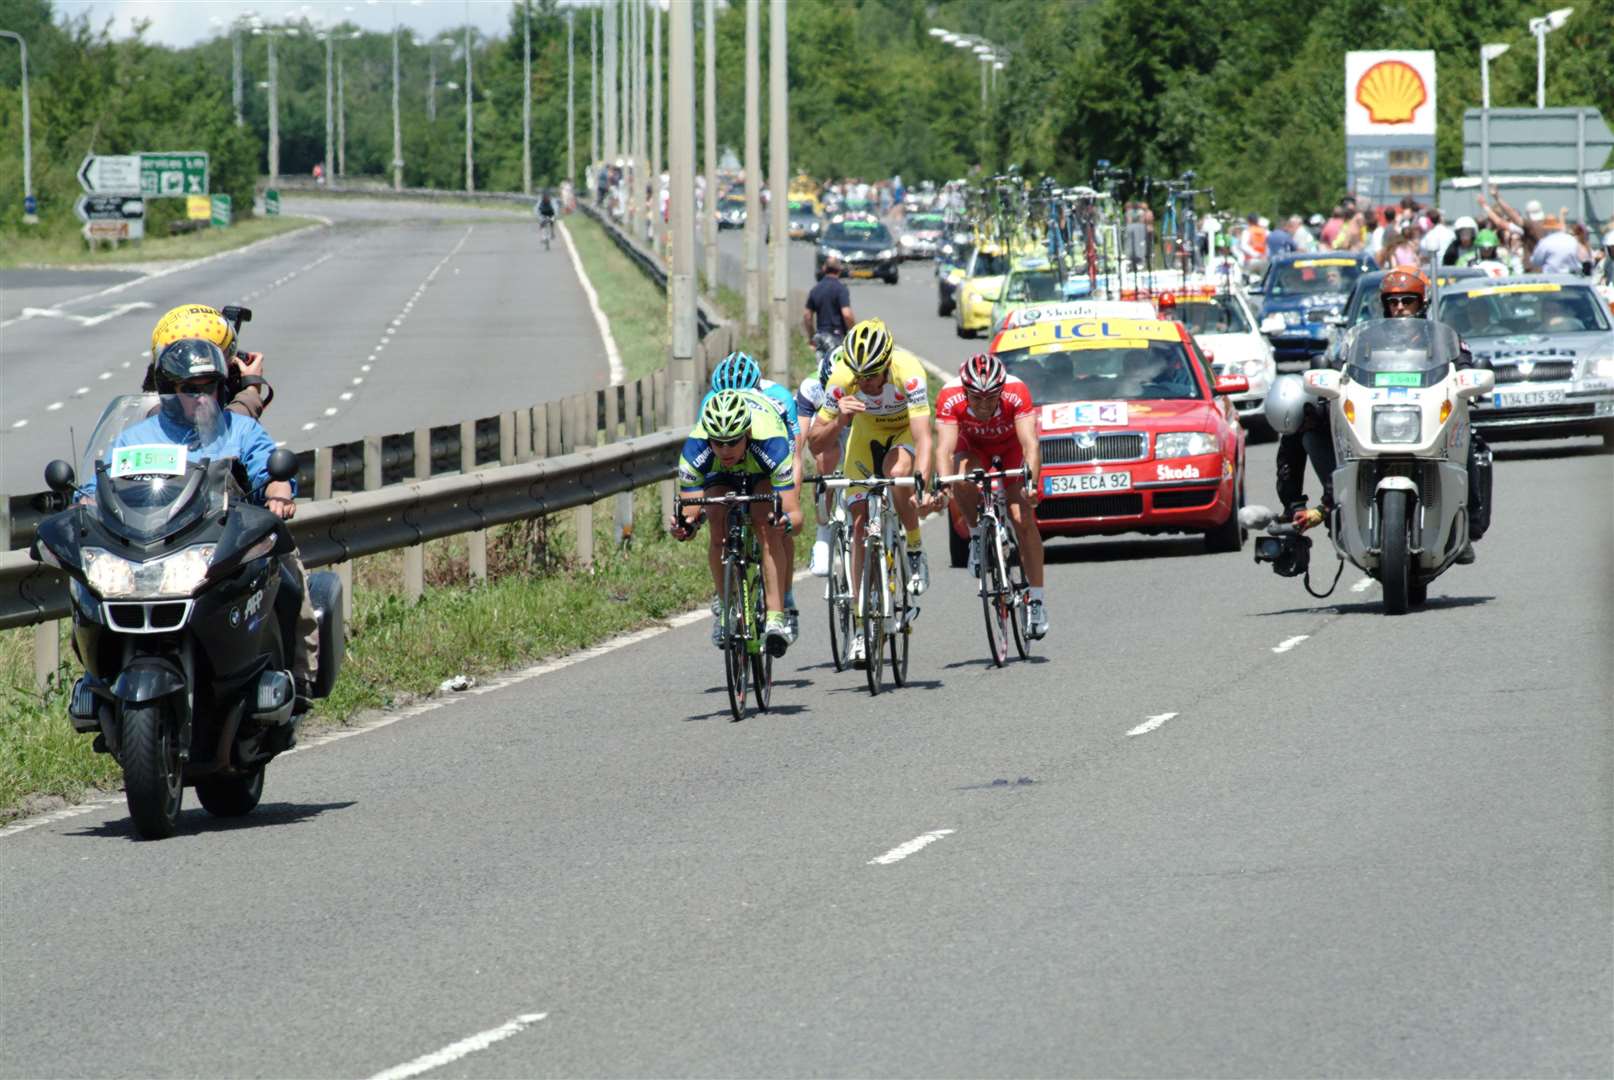 Breakaway leaders were four minutes clear as they went down Blue Bell Hill